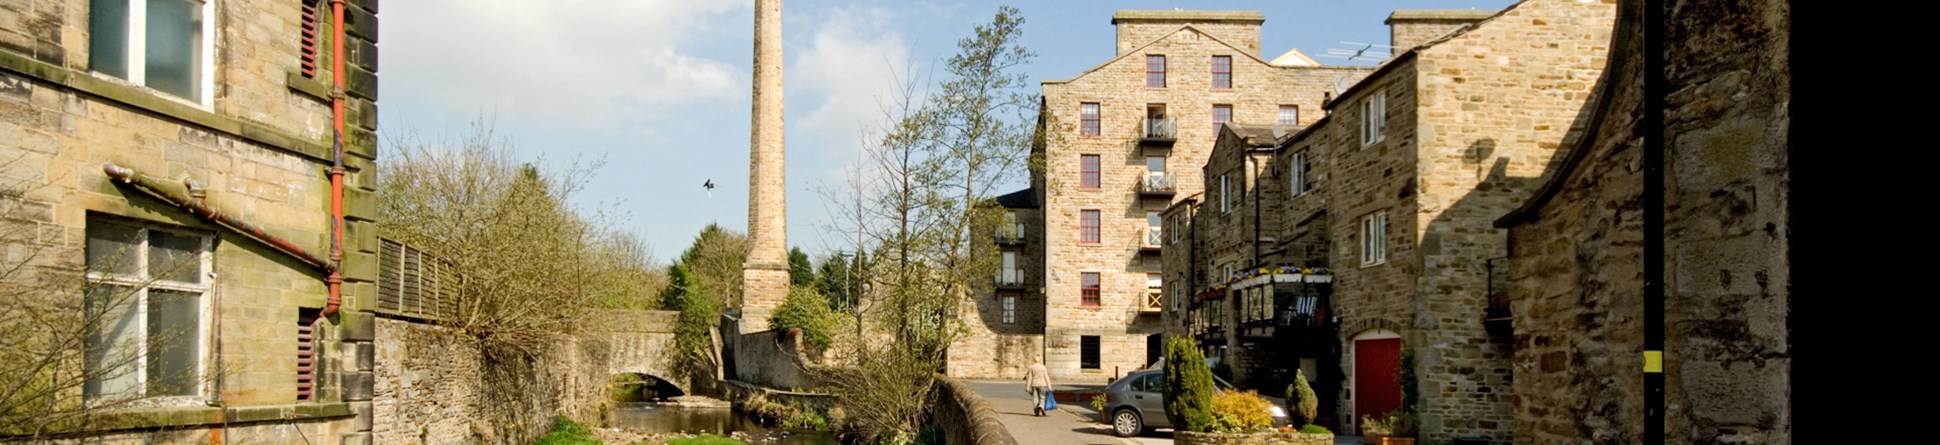 View along waterway to mill chimney and conversion, Skipton.